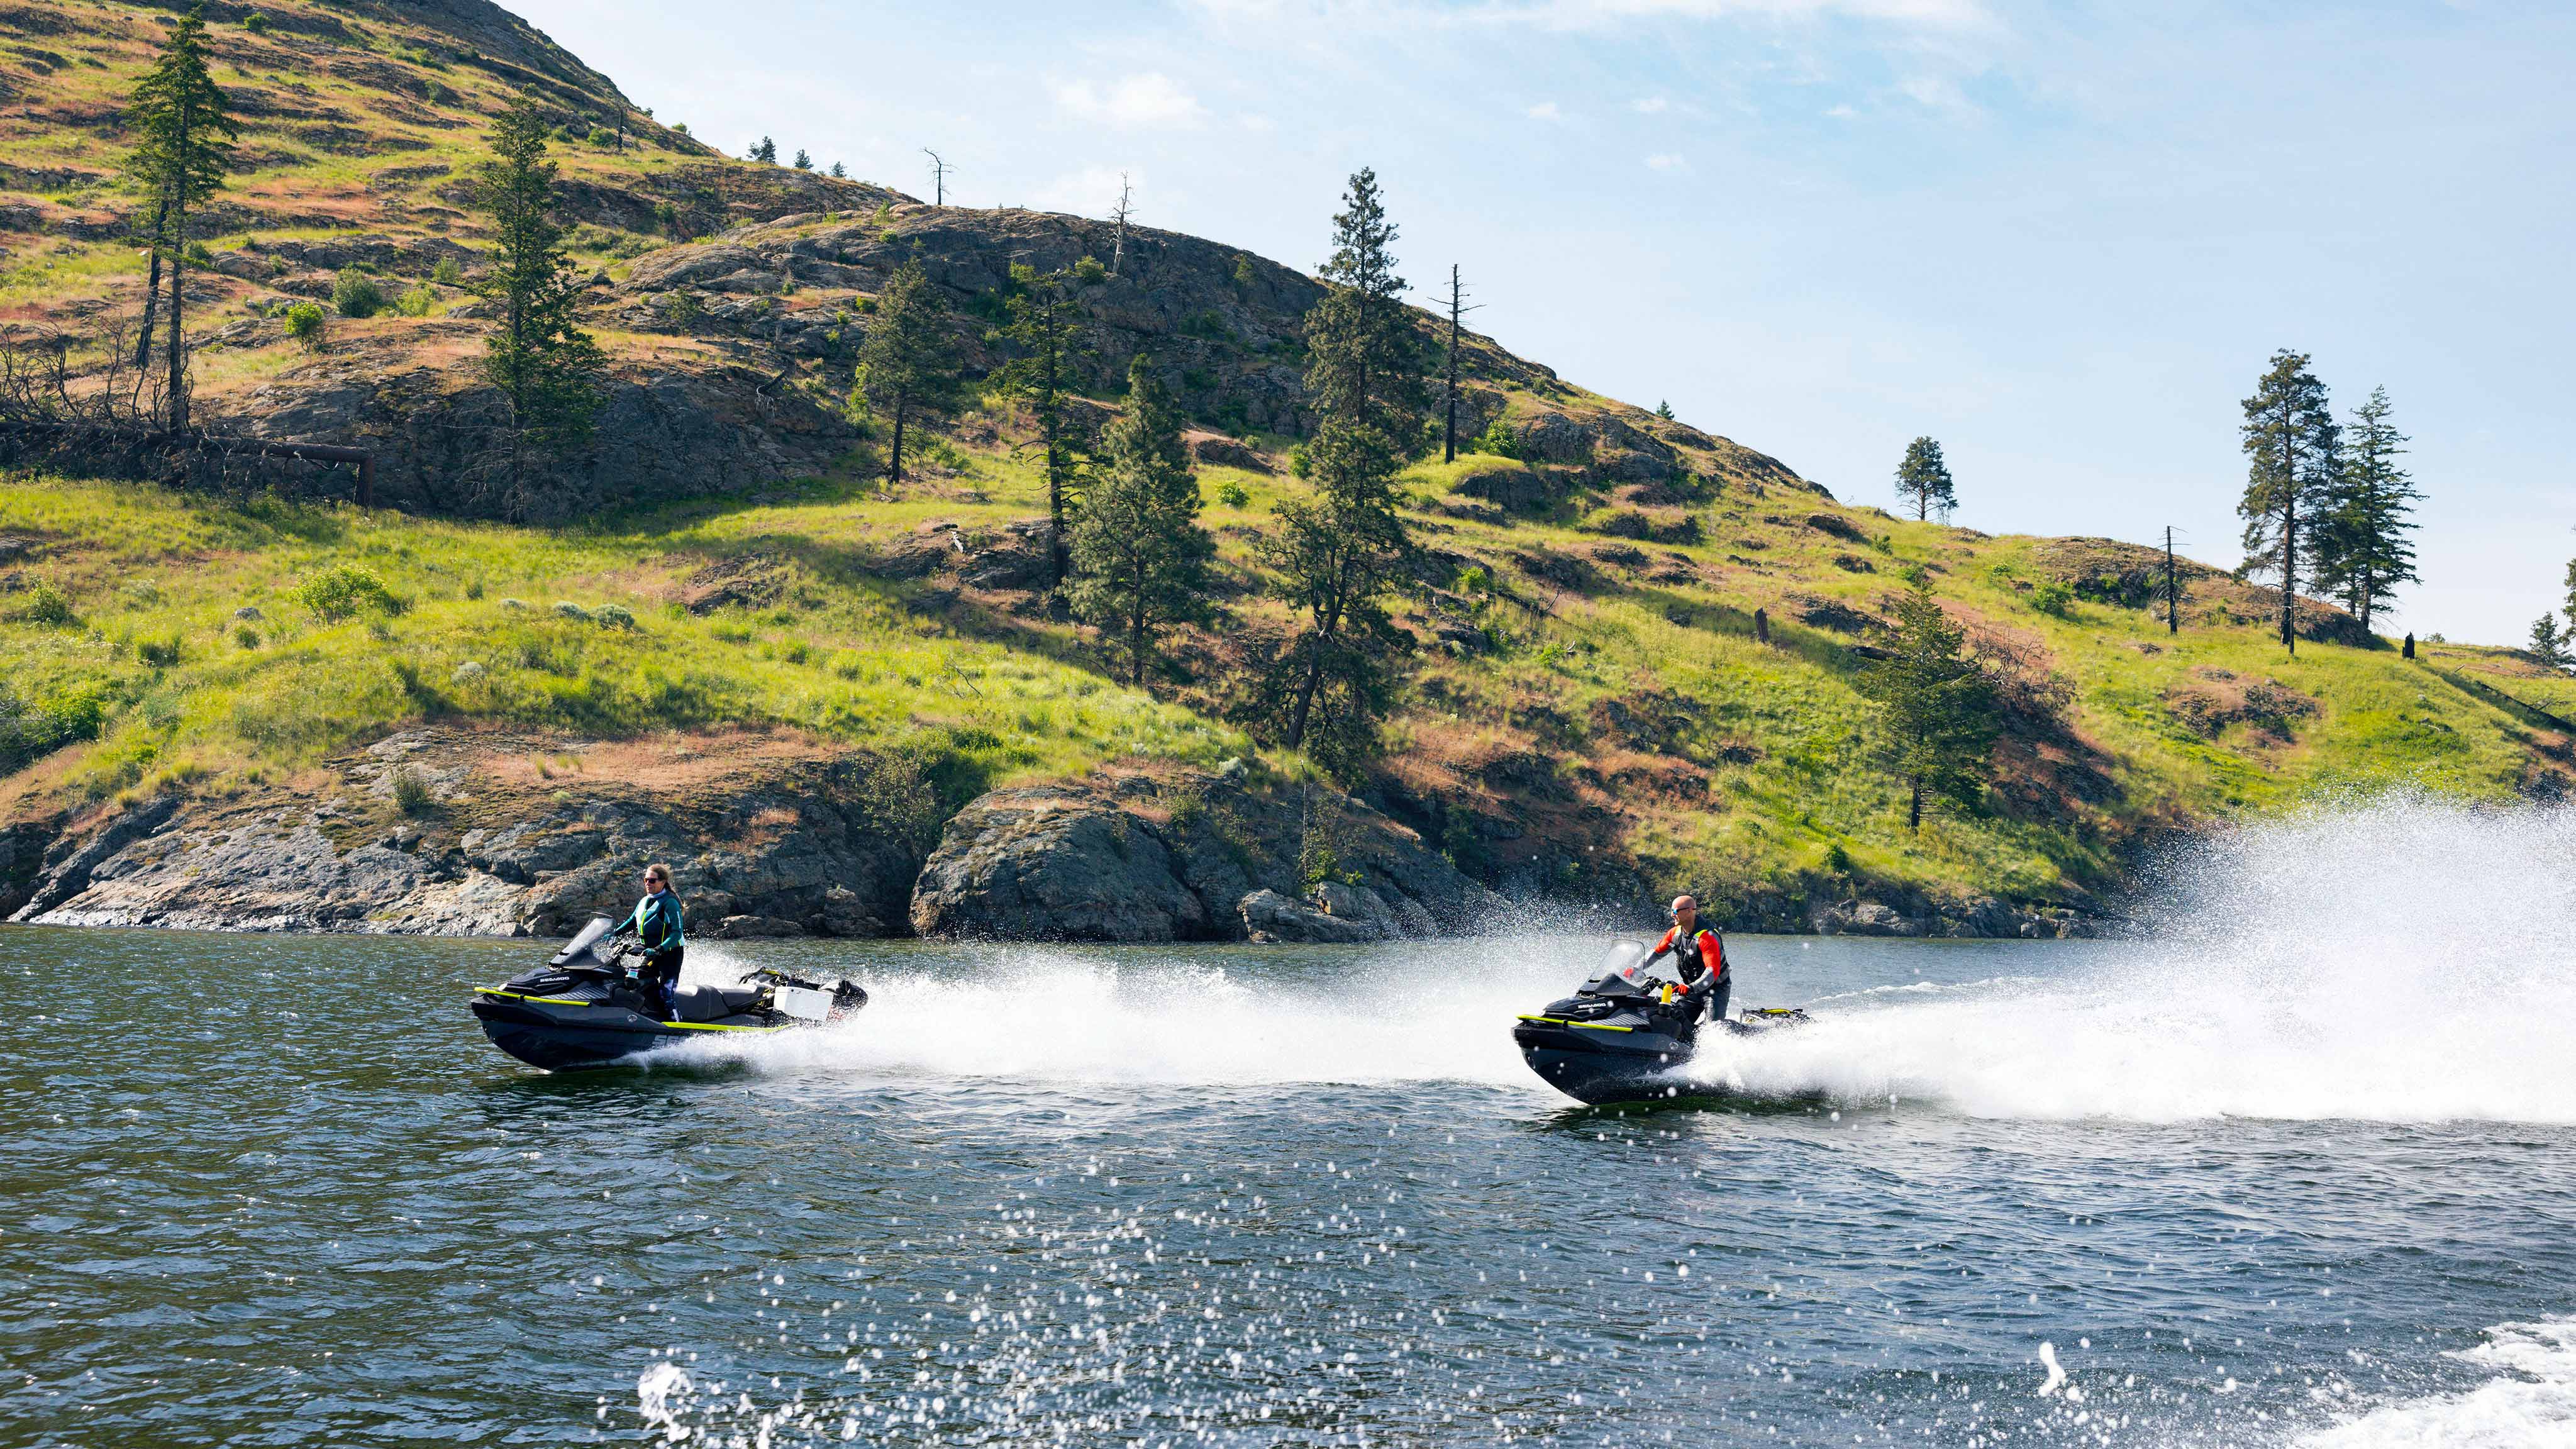 Two riders driving their Sea-Doo Explorer Pro 170